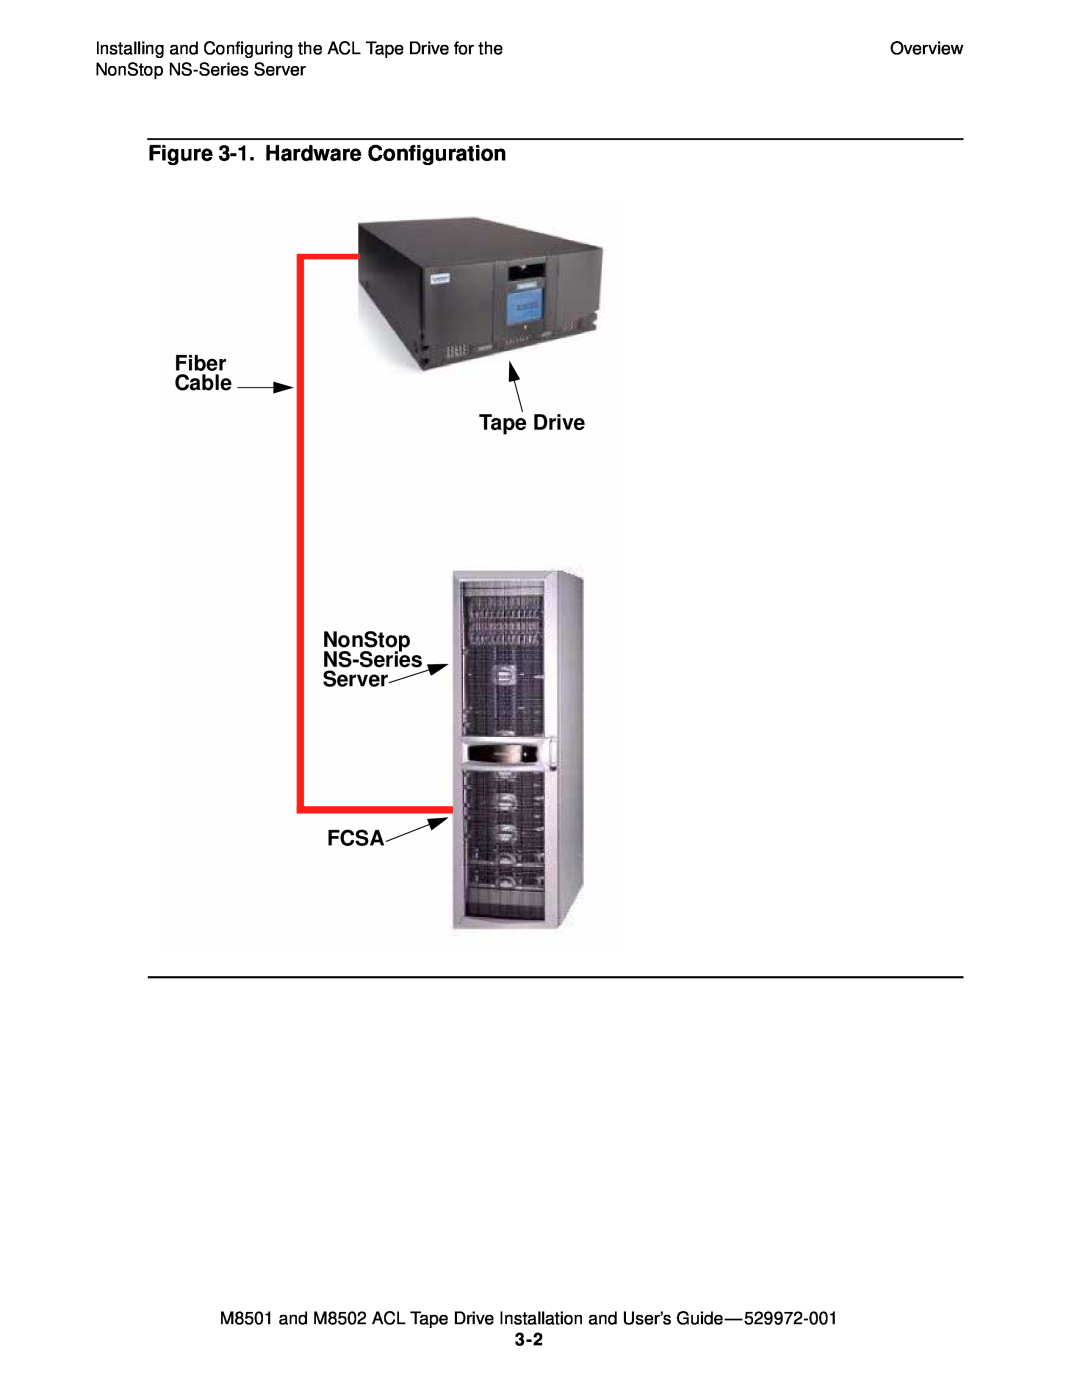 SMC Networks M8501 manual 1. Hardware Configuration Fiber Cable Tape Drive NonStop, NS-Series Server FCSA, Overview 